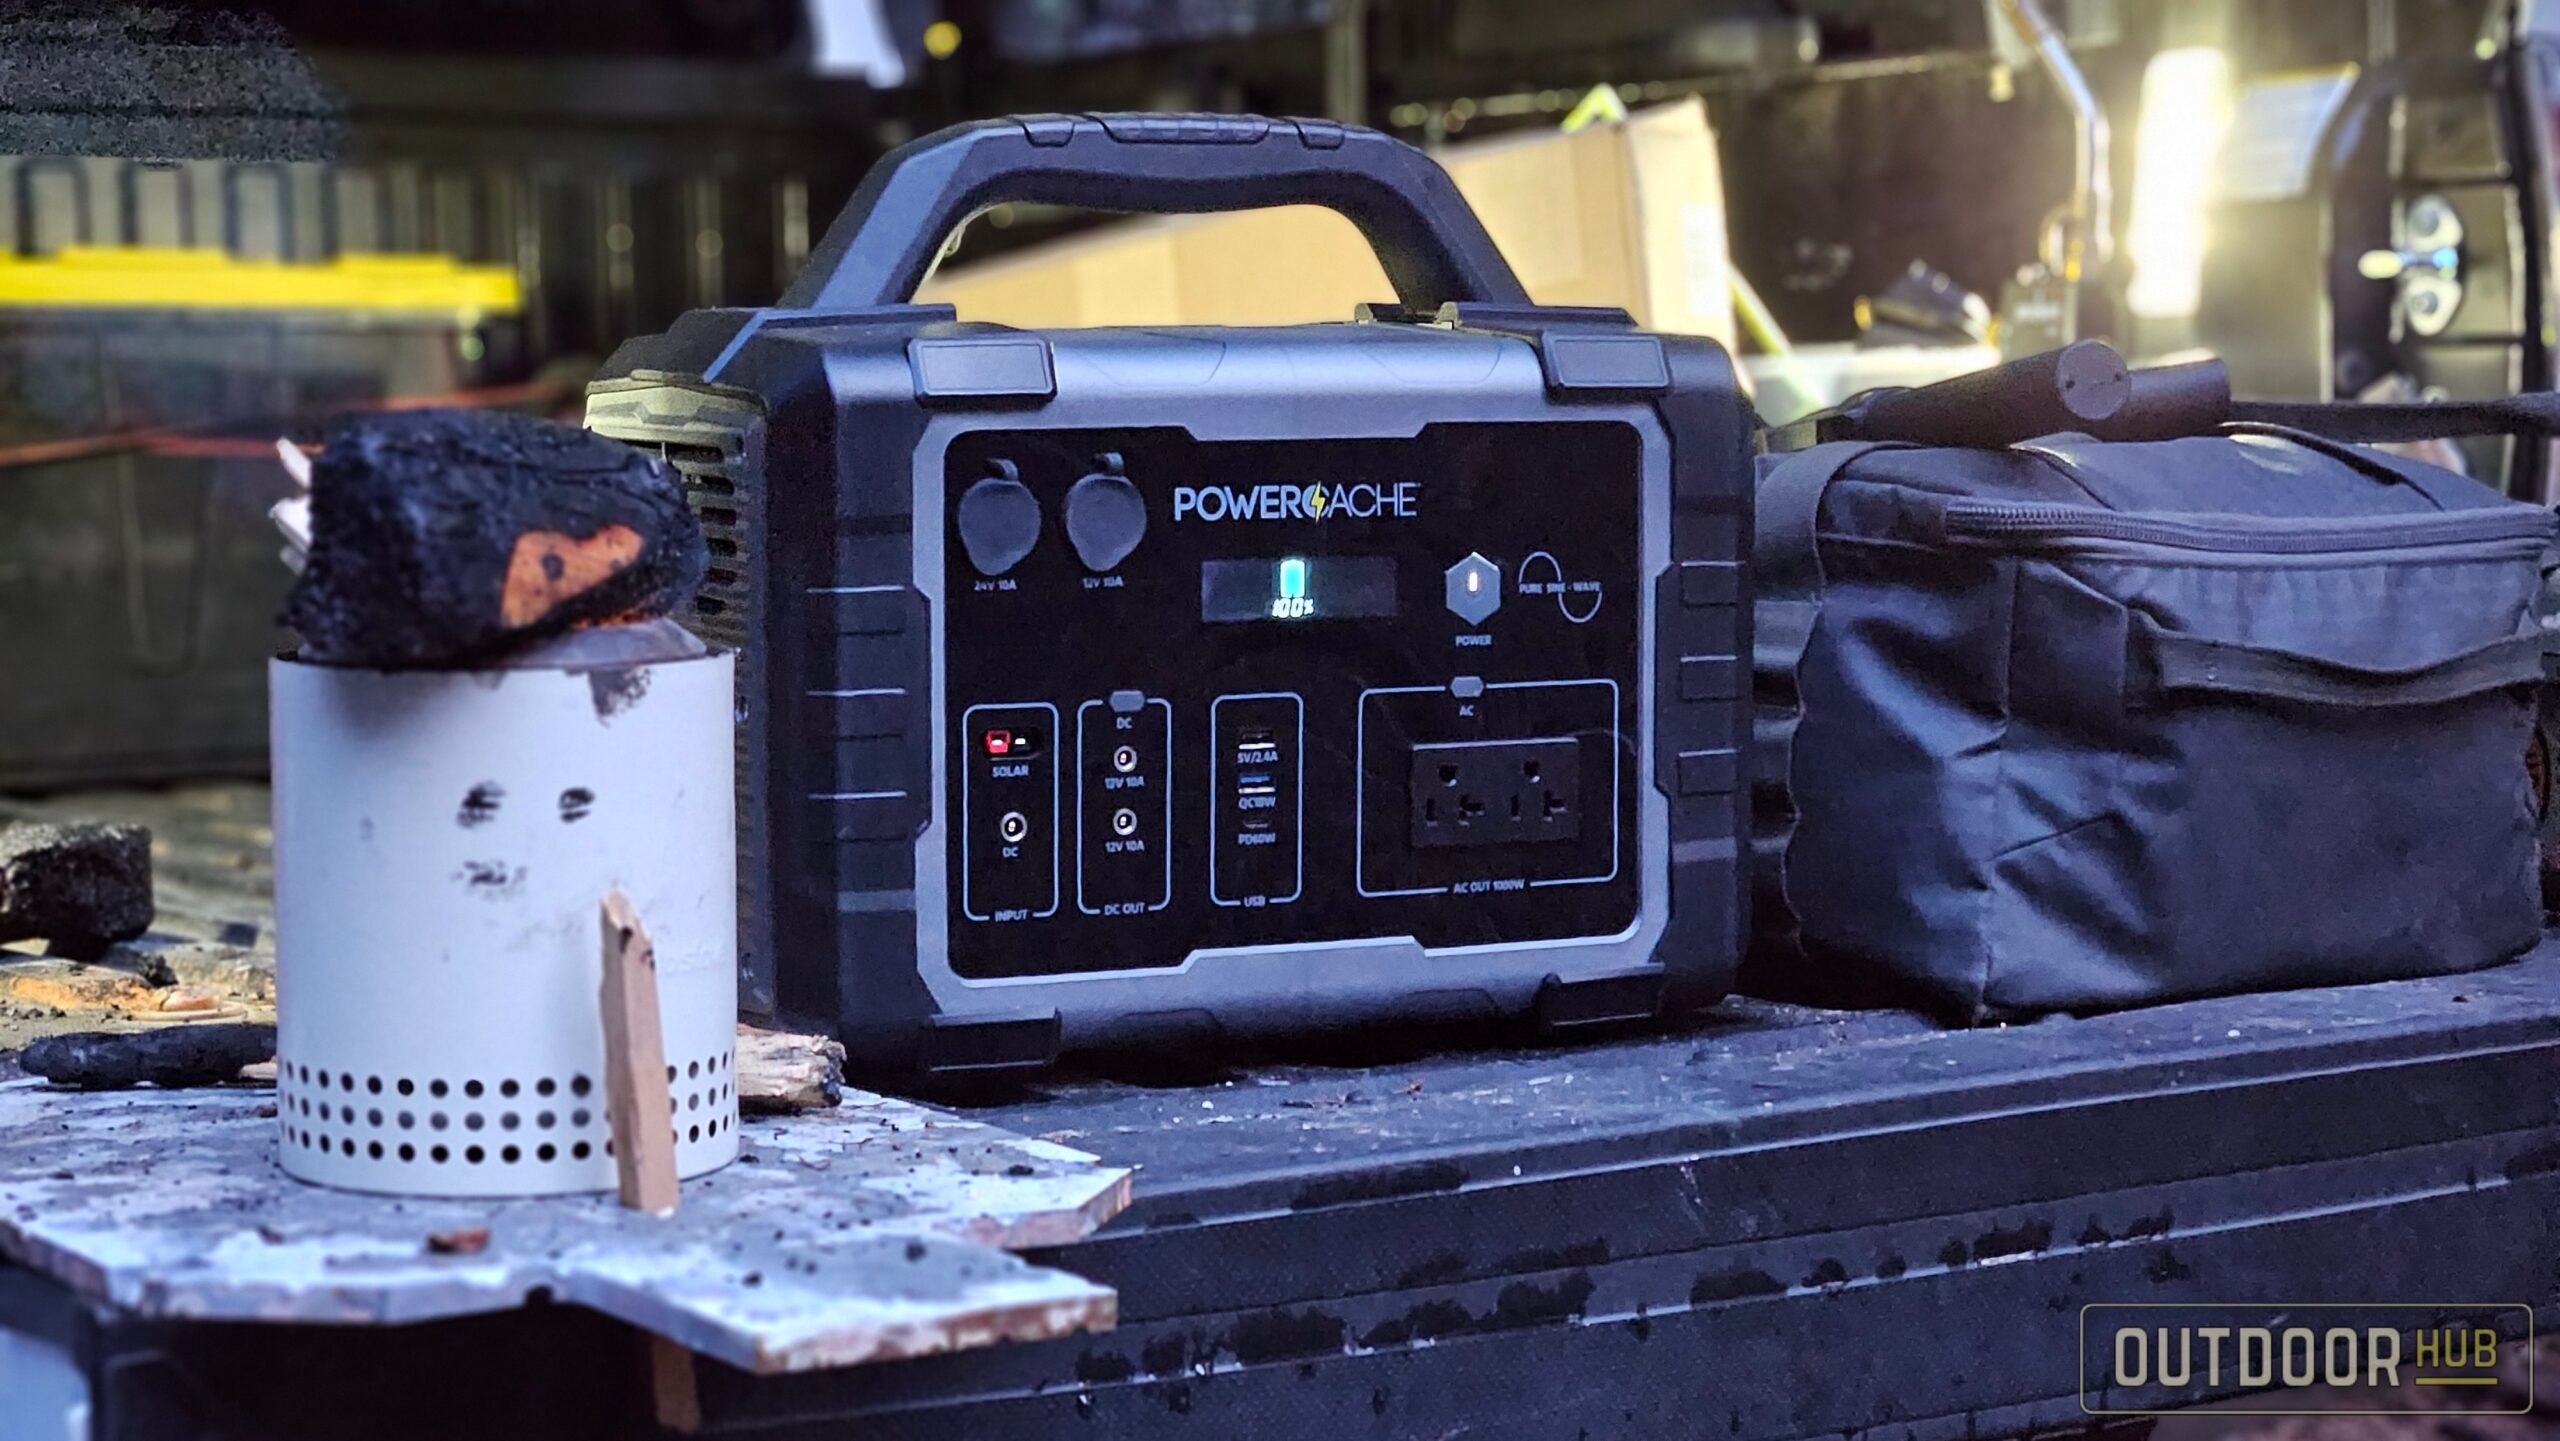 OHUB Review: The Monoprice PowerCache 1000 Portable Power Station